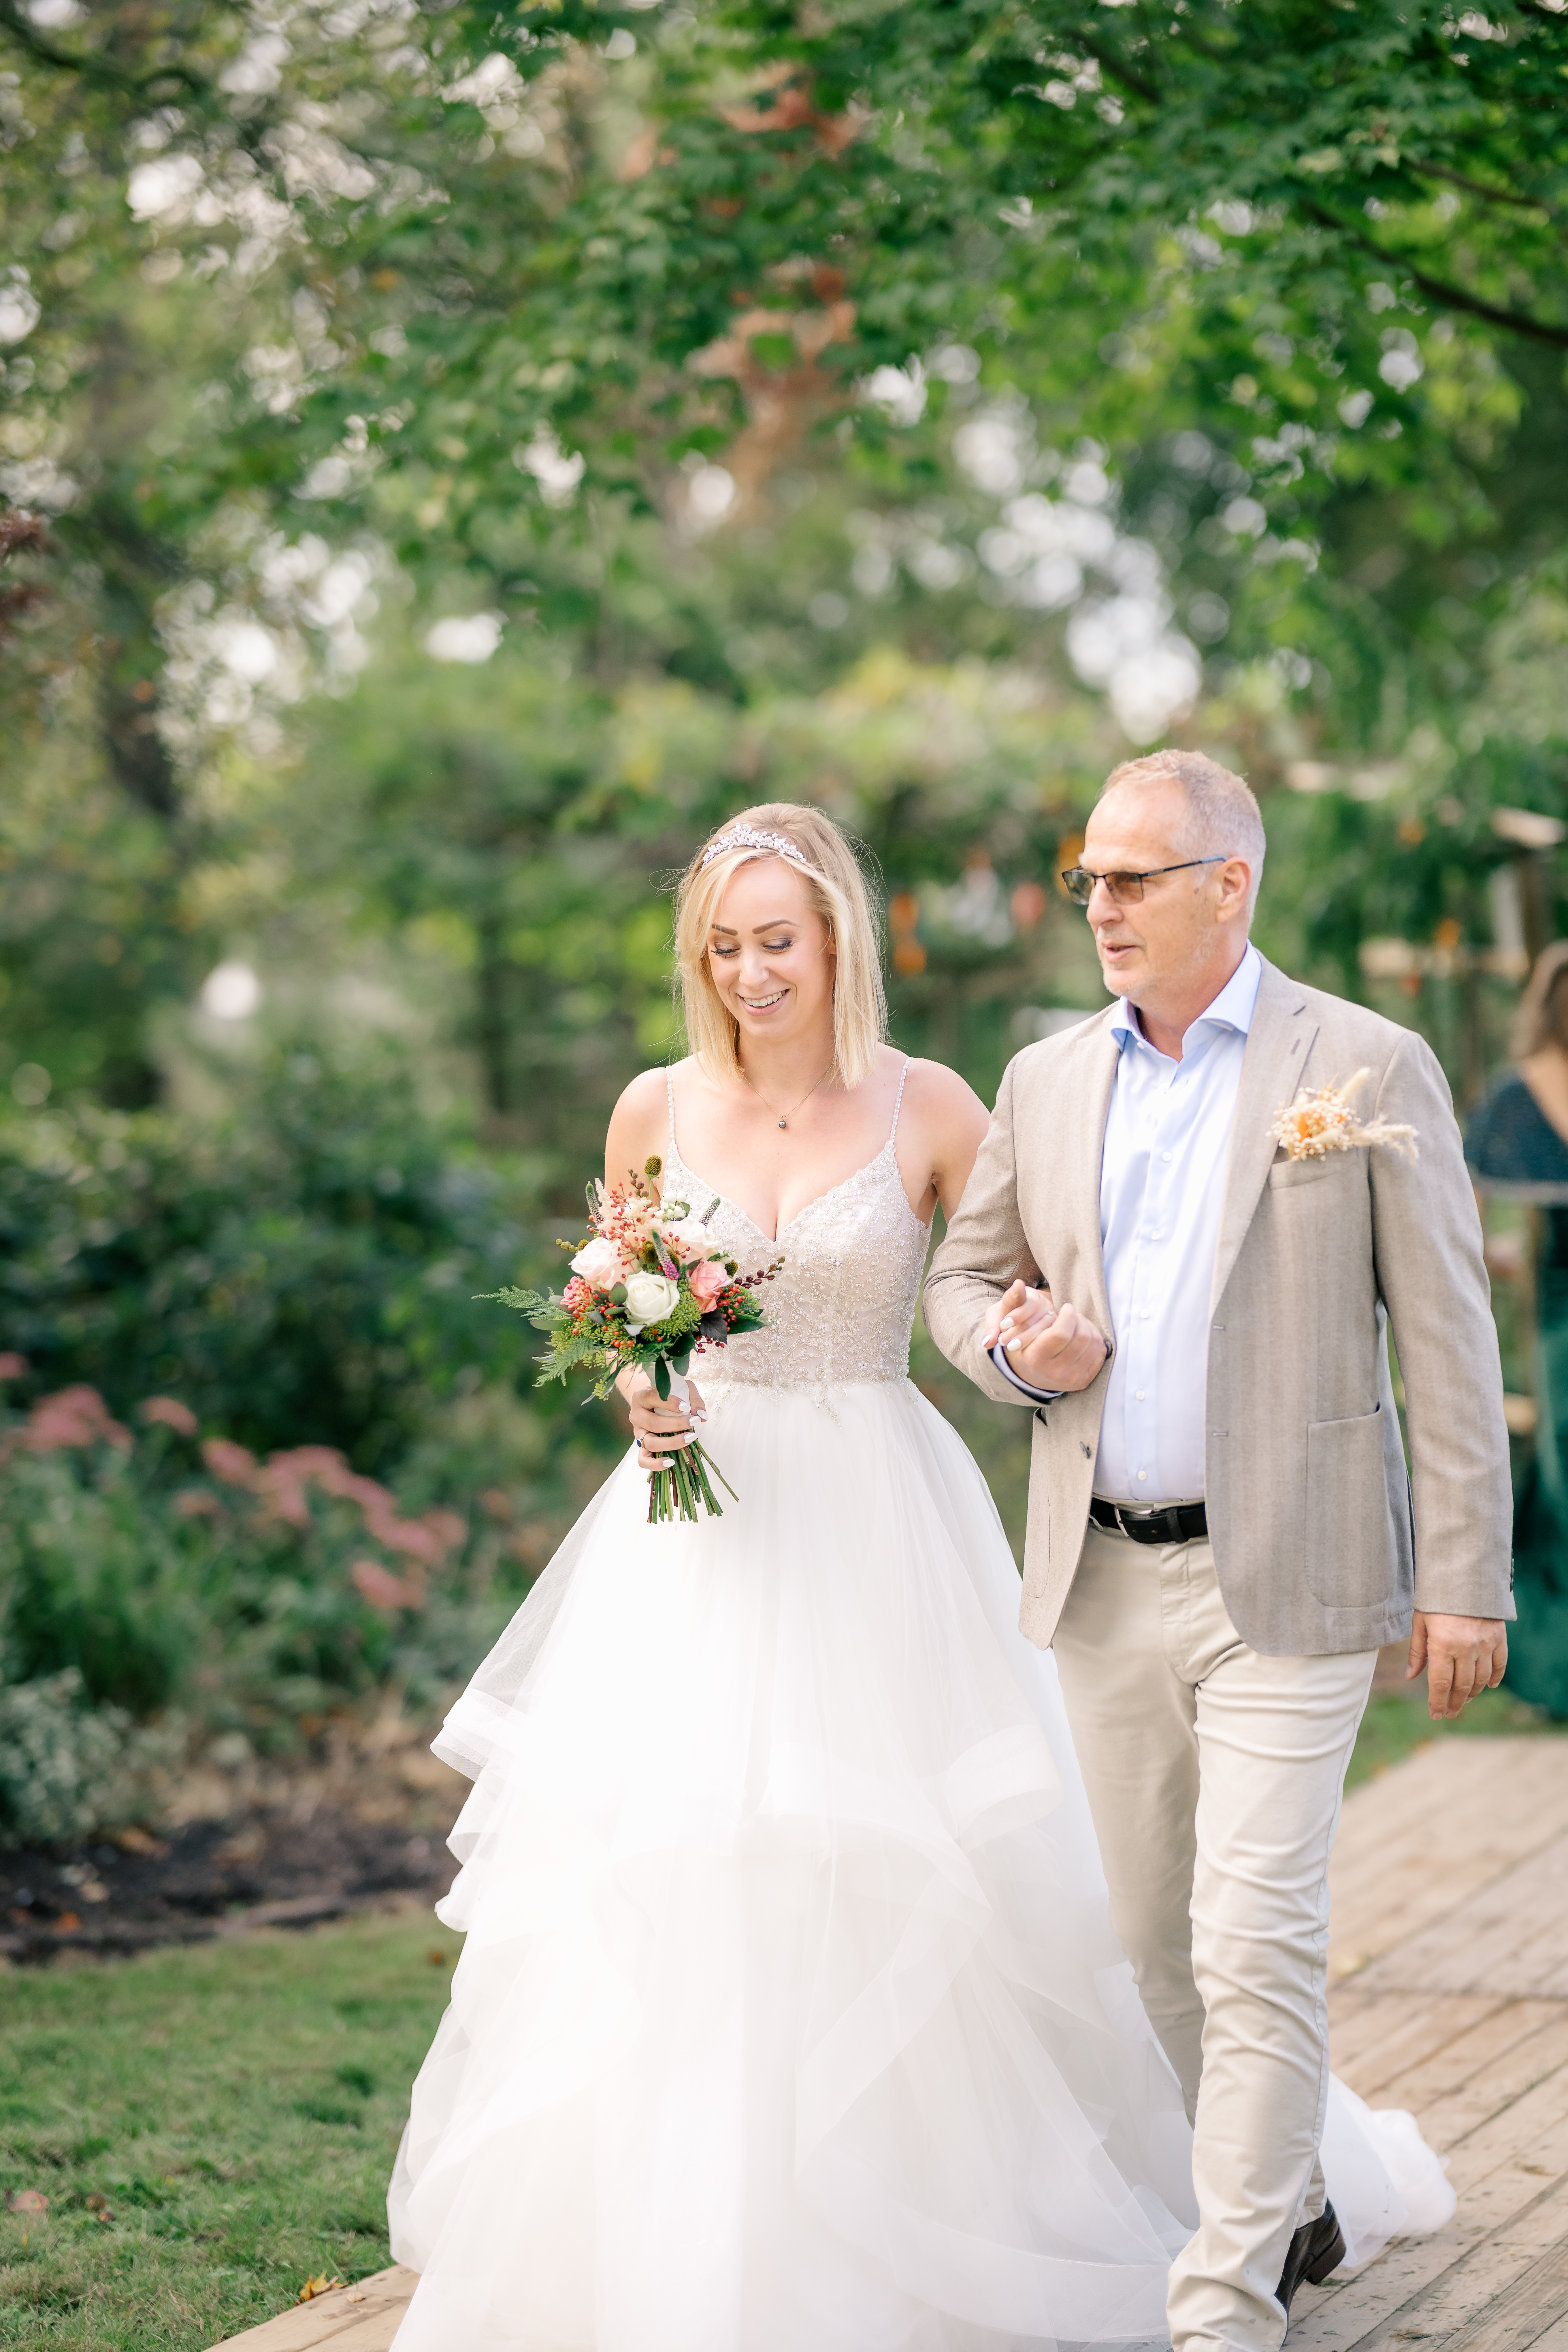 Father of the bride leads the bride down a wooden plank aisle in a september garden wedding in Heerle.  All the garden is still green